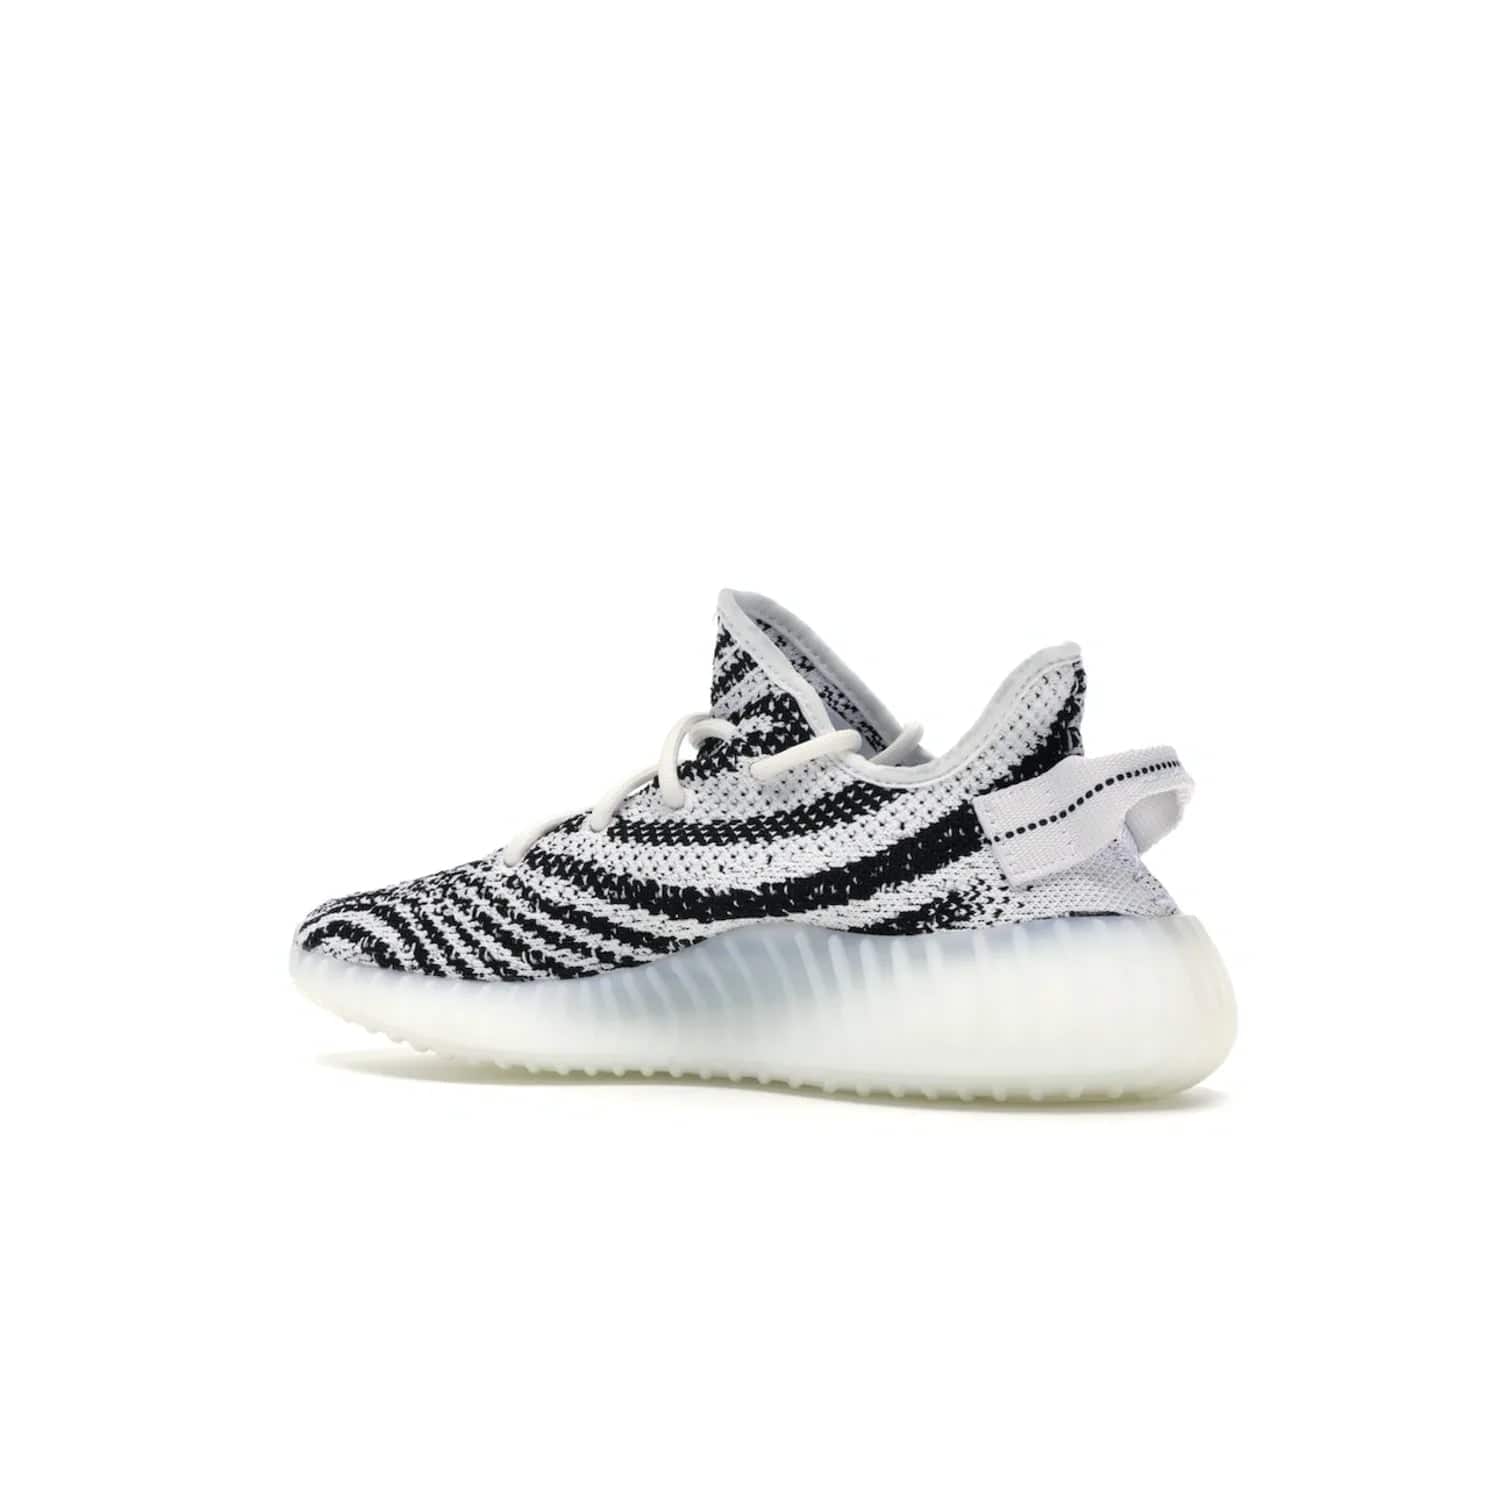 adidas Yeezy Boost 350 V2 Zebra - Image 22 - Only at www.BallersClubKickz.com - #
Score the iconic adidas Yeezy Boost 350 V2 Zebra for a fashionable addition to your street-style. Featuring a Primeknit upper and Boost sole, you'll look great and feel comfortable with every step.